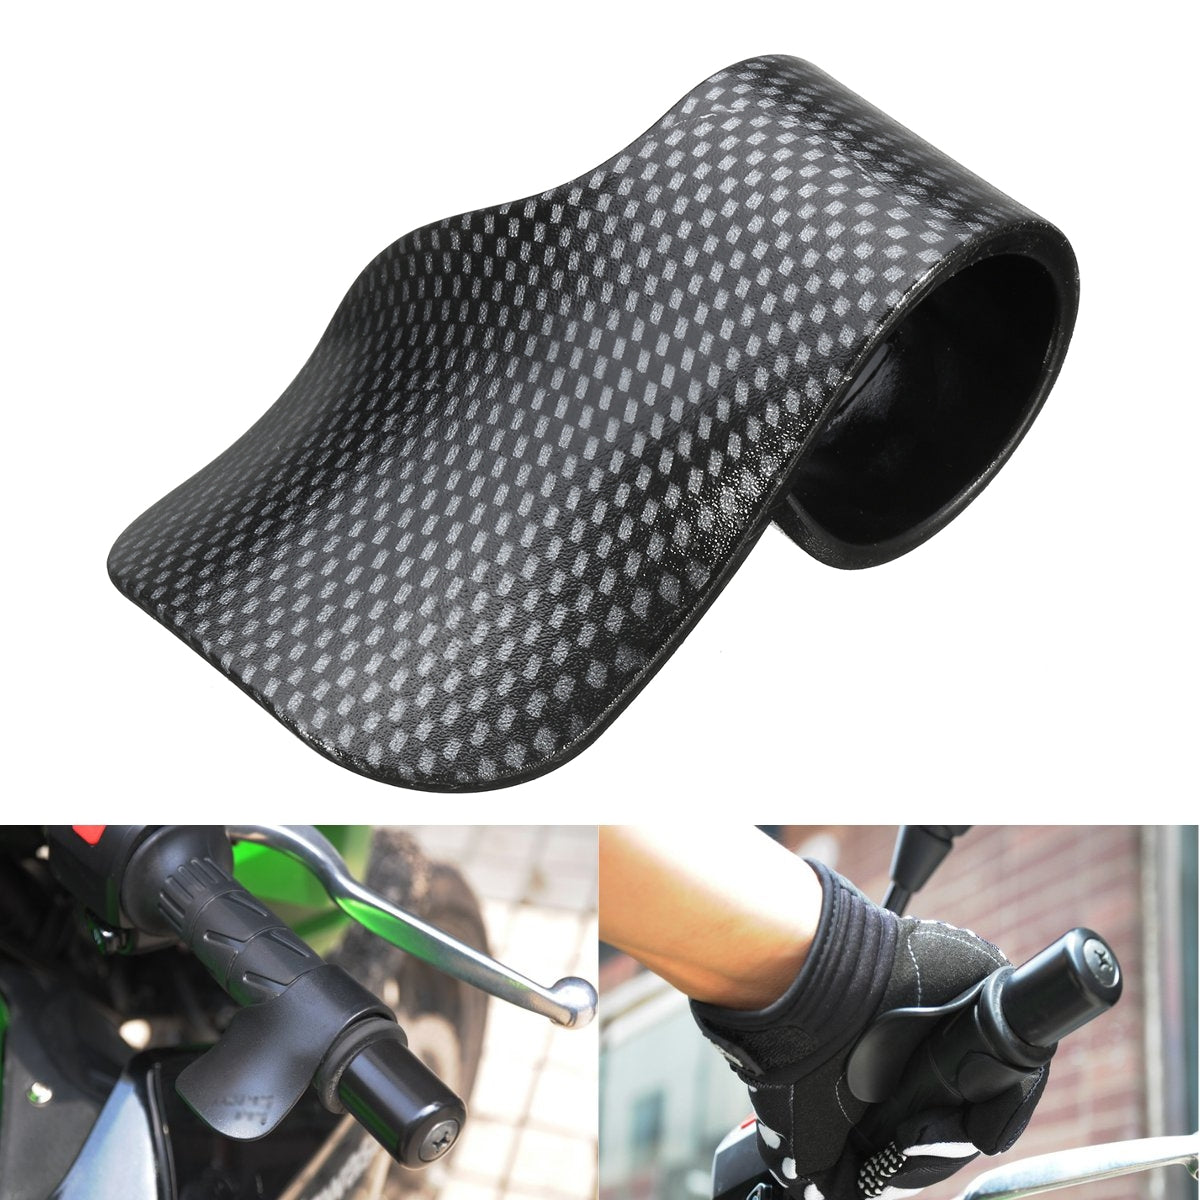 Dim Gray Grip Throttle Assist Wrist Cruise Control Rest Universal Carbon for Motorcycle E-Bike